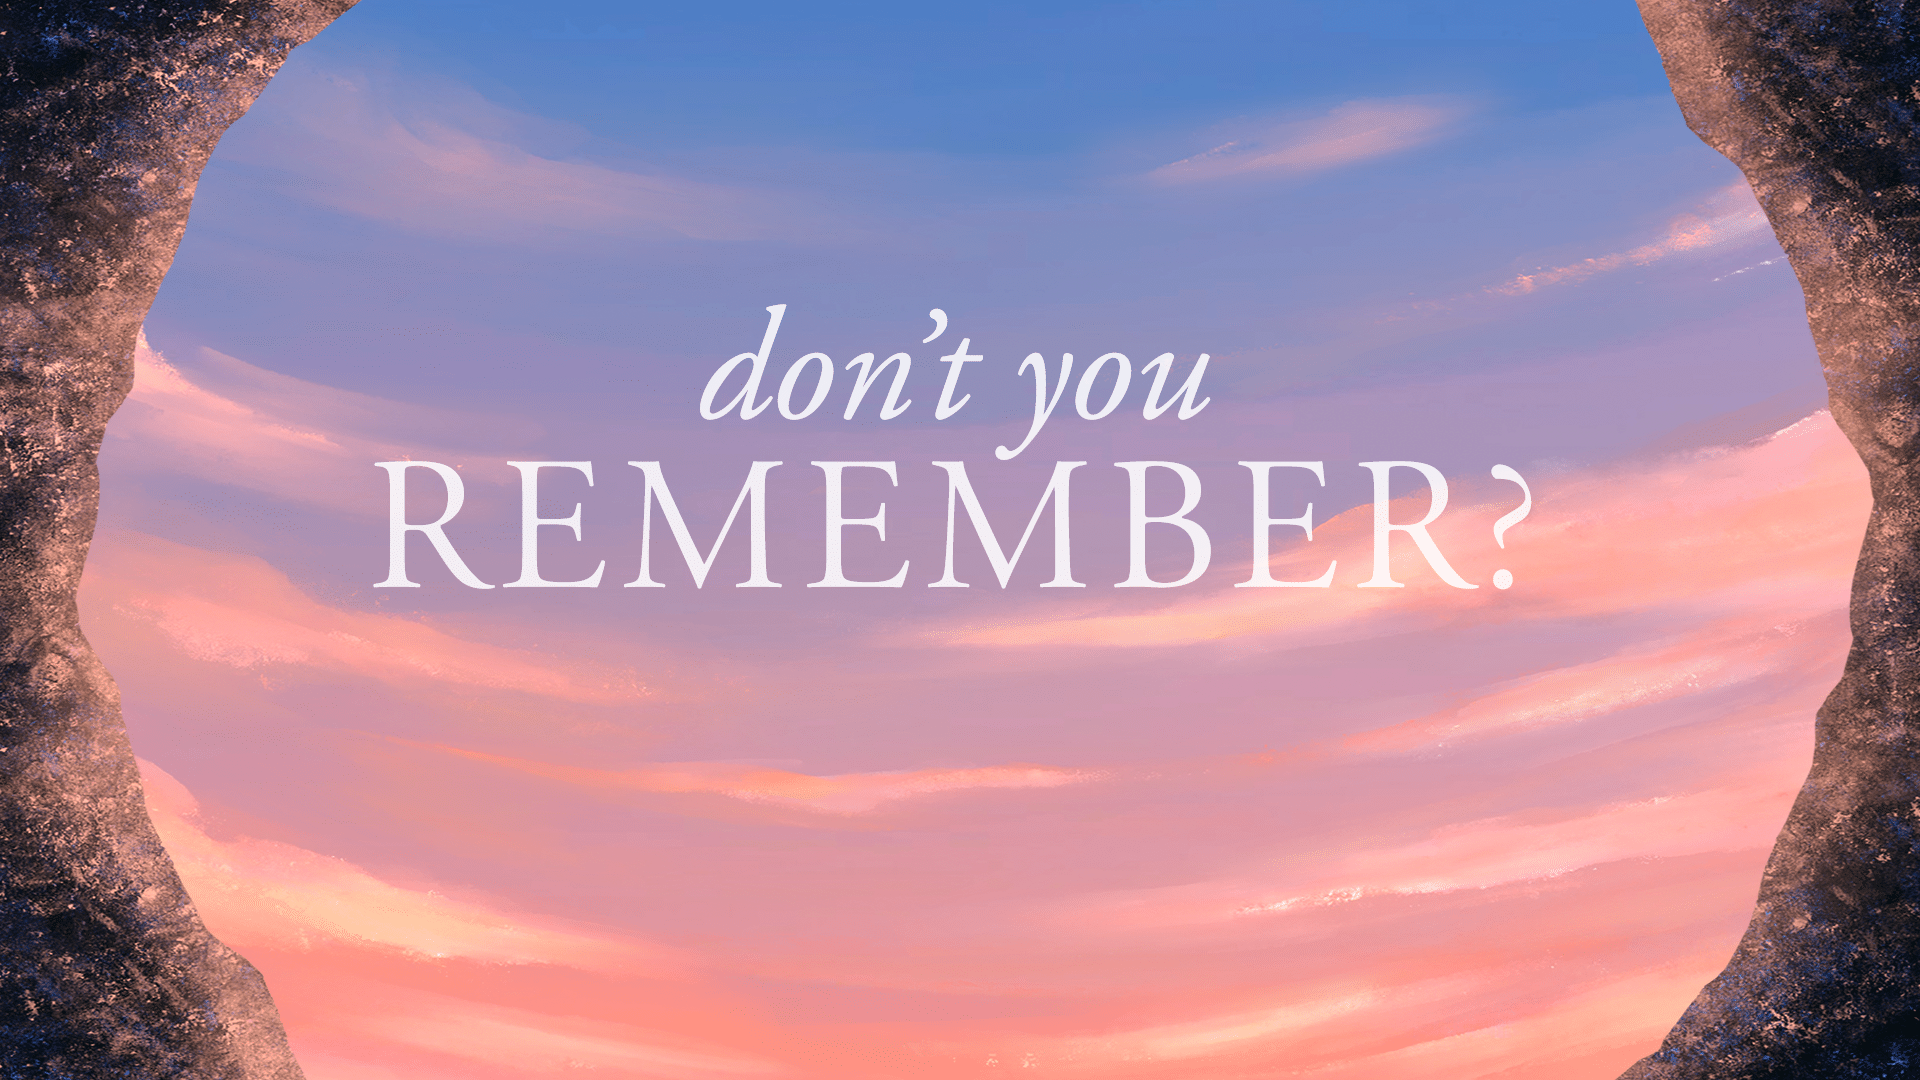 Don't You Remember?